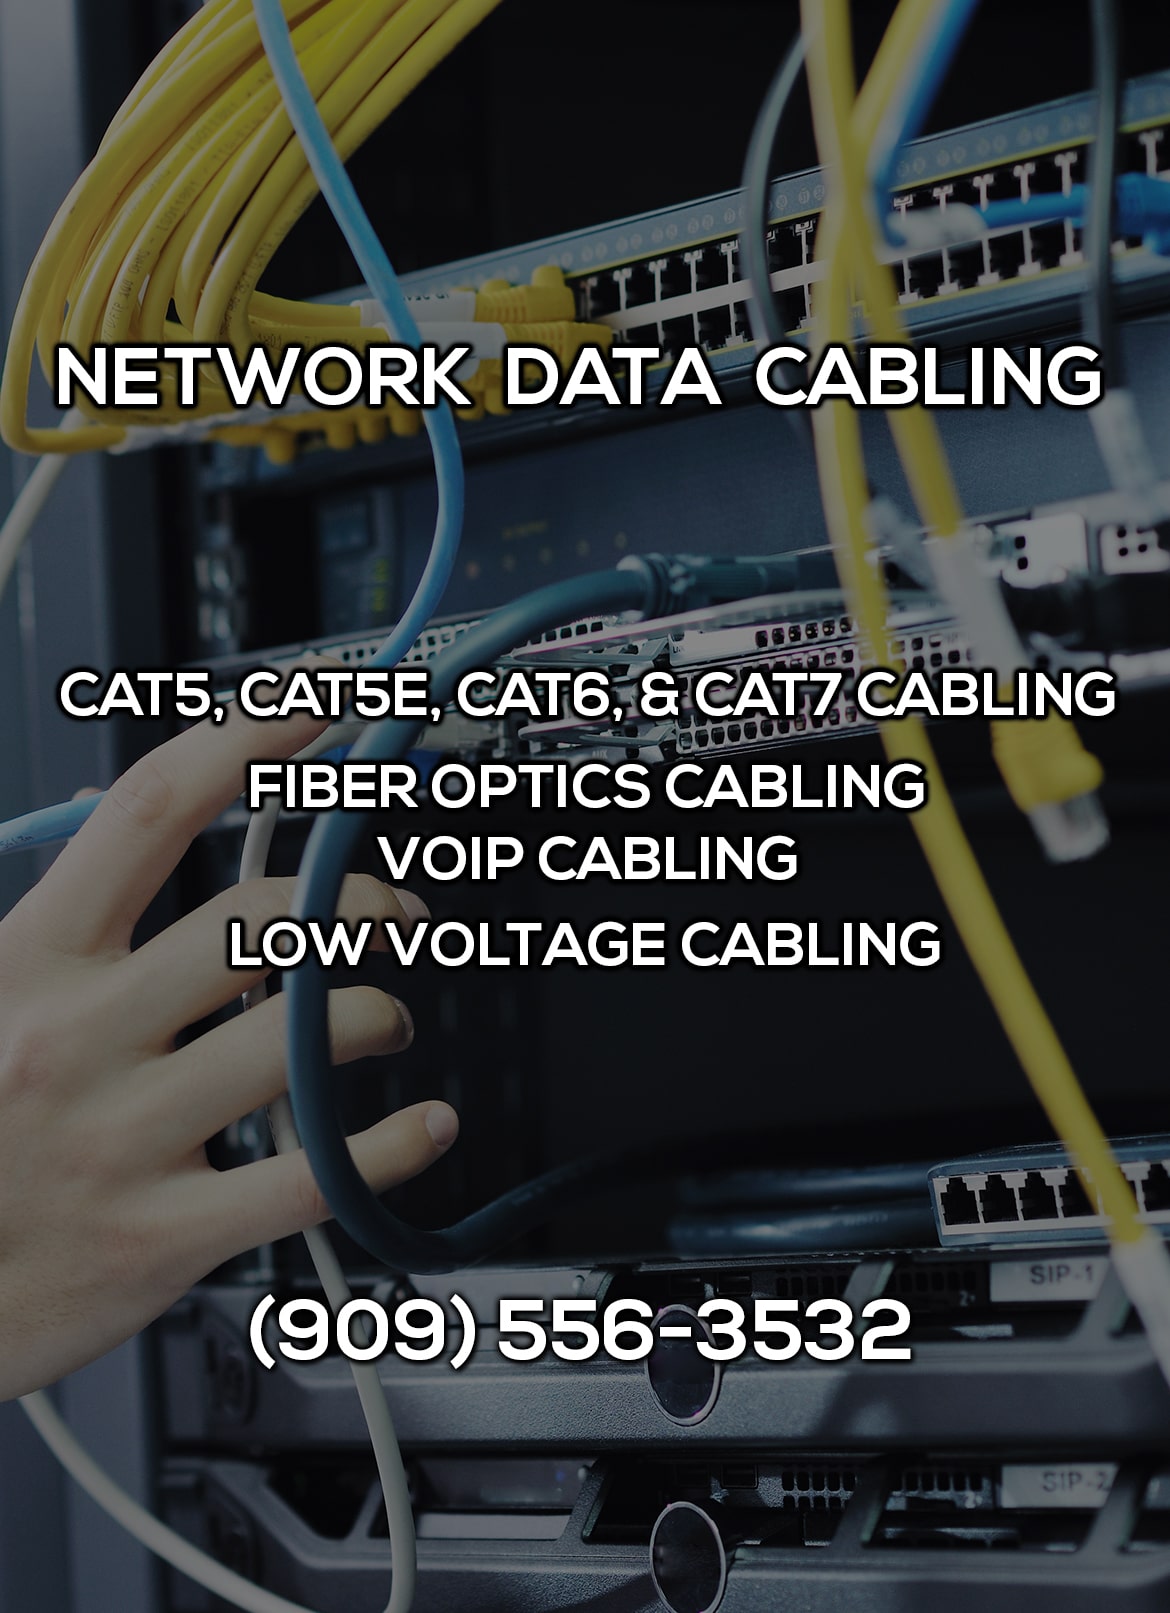 Network Data Cabling in Indian Wells CA